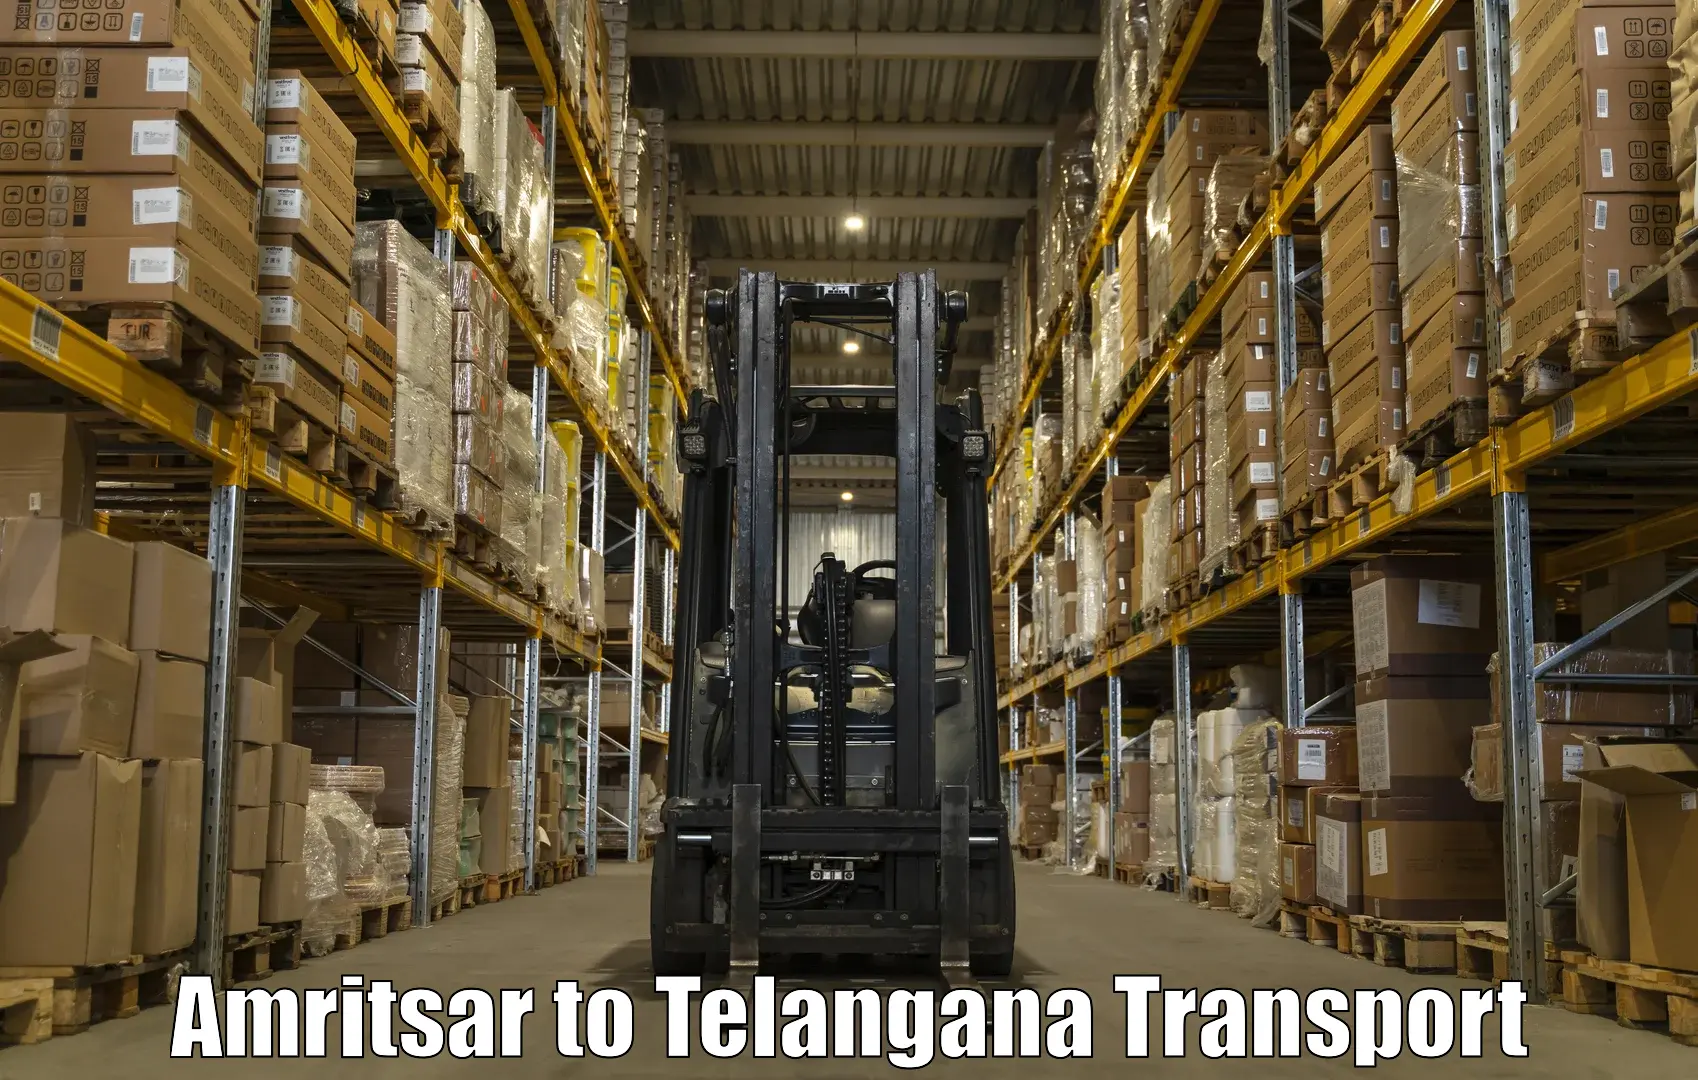 Daily parcel service transport Amritsar to Bhadrachalam